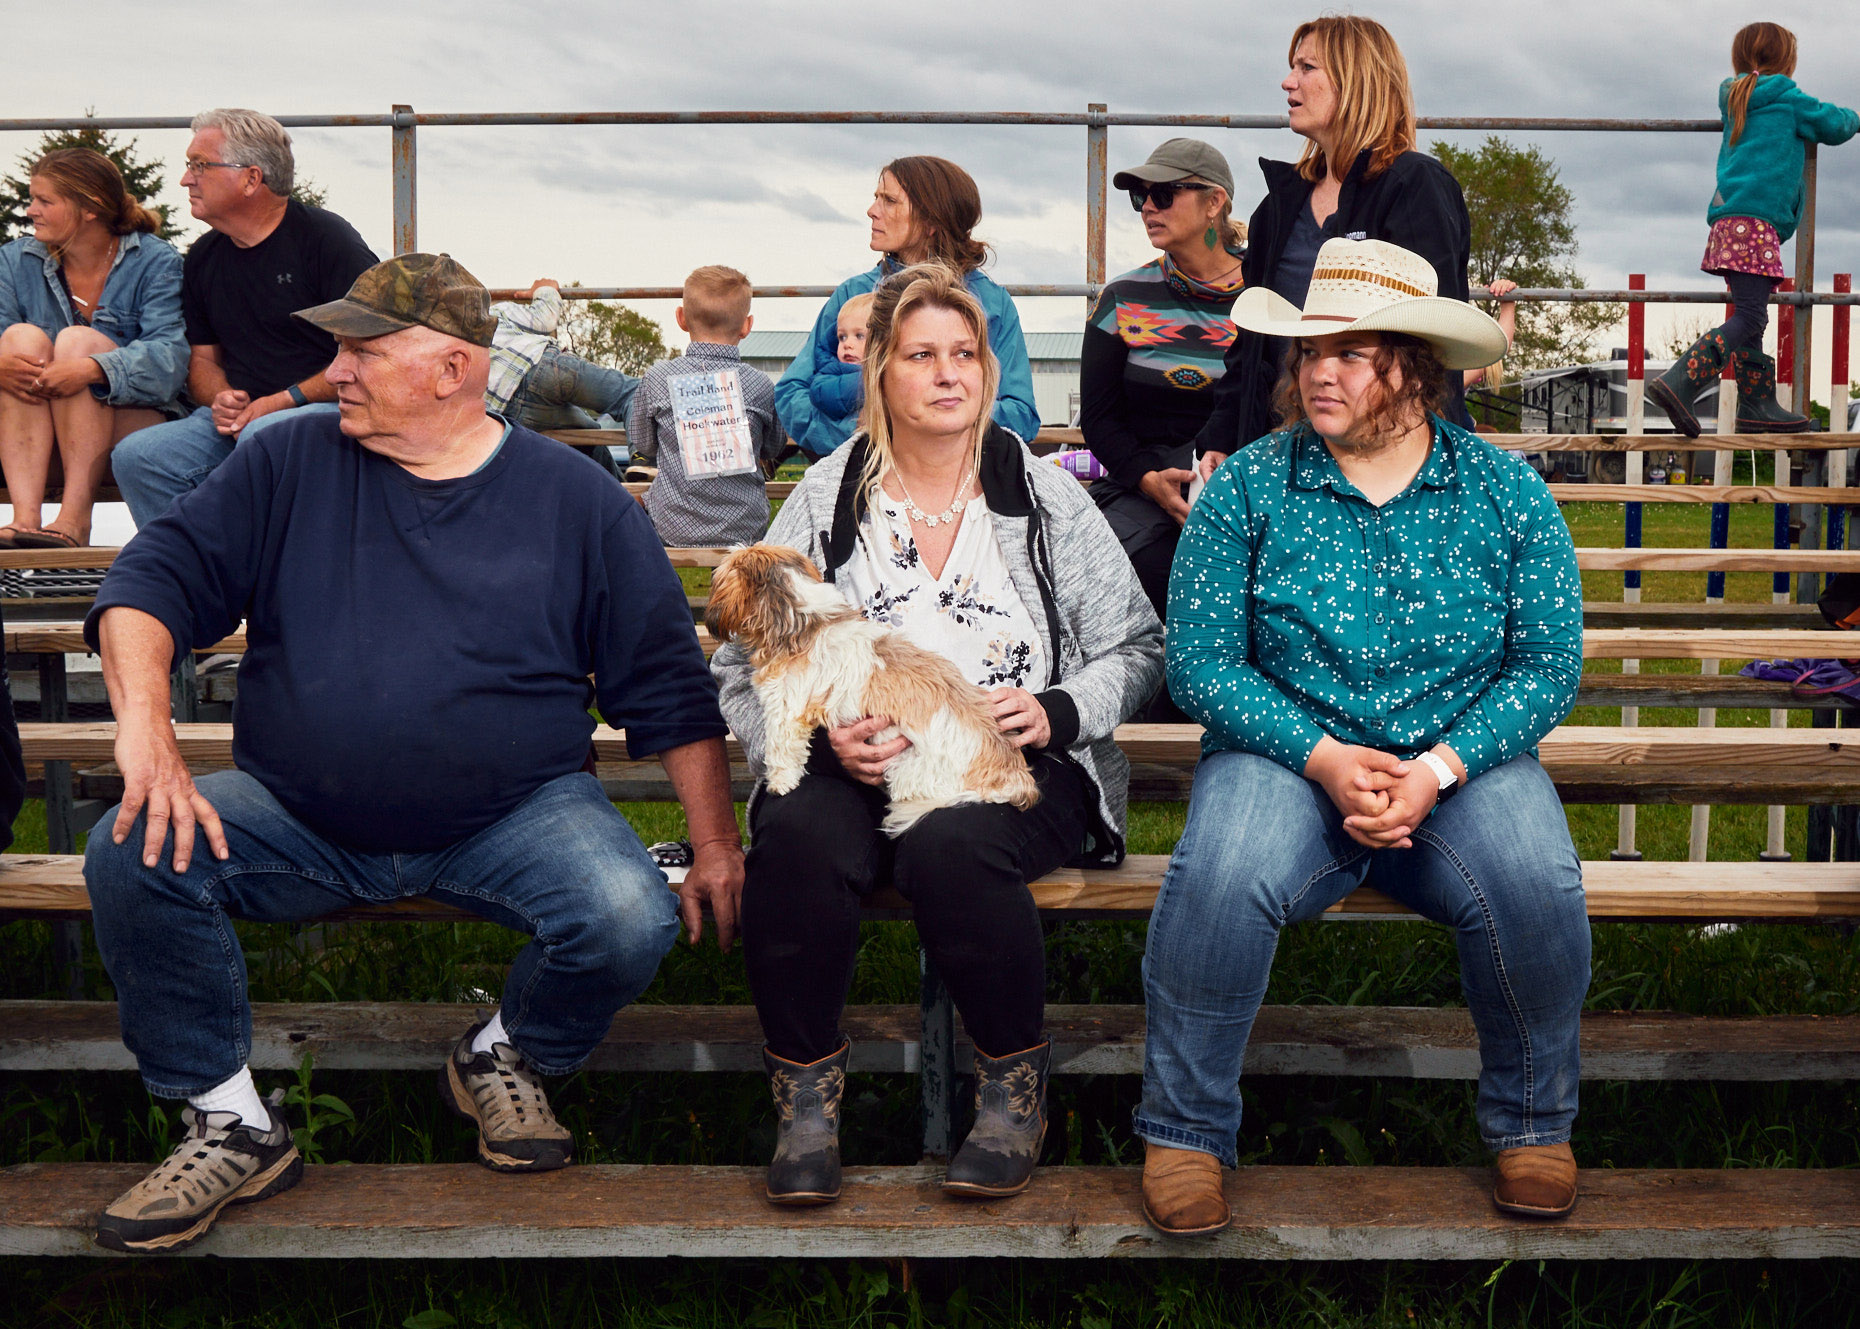 Spectators at kids rodeo | lifestyle photography by Saverio Truglia